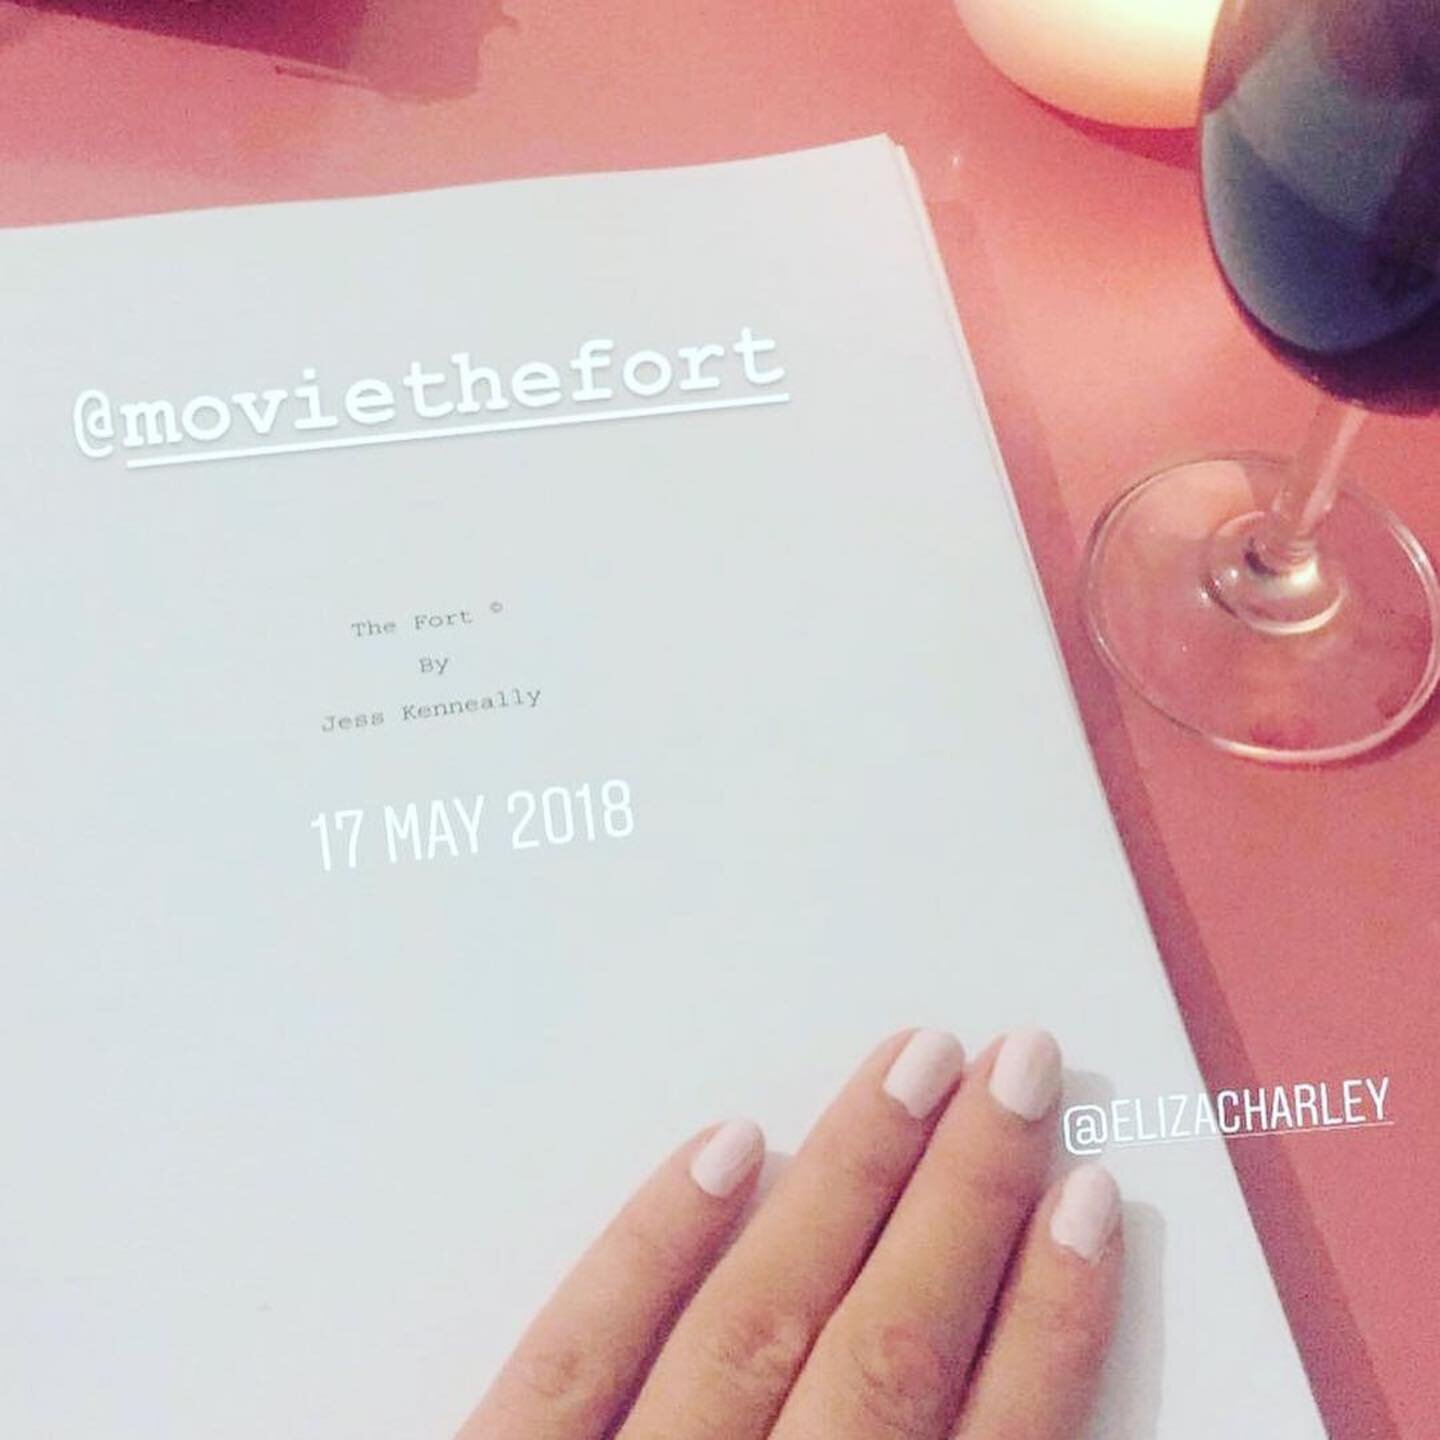 #Repost @elizacharley
・・・
How it started 👉 How it&rsquo;s going 🎉 
&hellip;&hellip;
&ldquo;The Fort&rdquo; is an Official Selection for the 2021 @cinefestoz program.
&hellip;&hellip;
Executive Producer:
@shaynnablaze 
Mitu Bhowmick Lange

Producer: